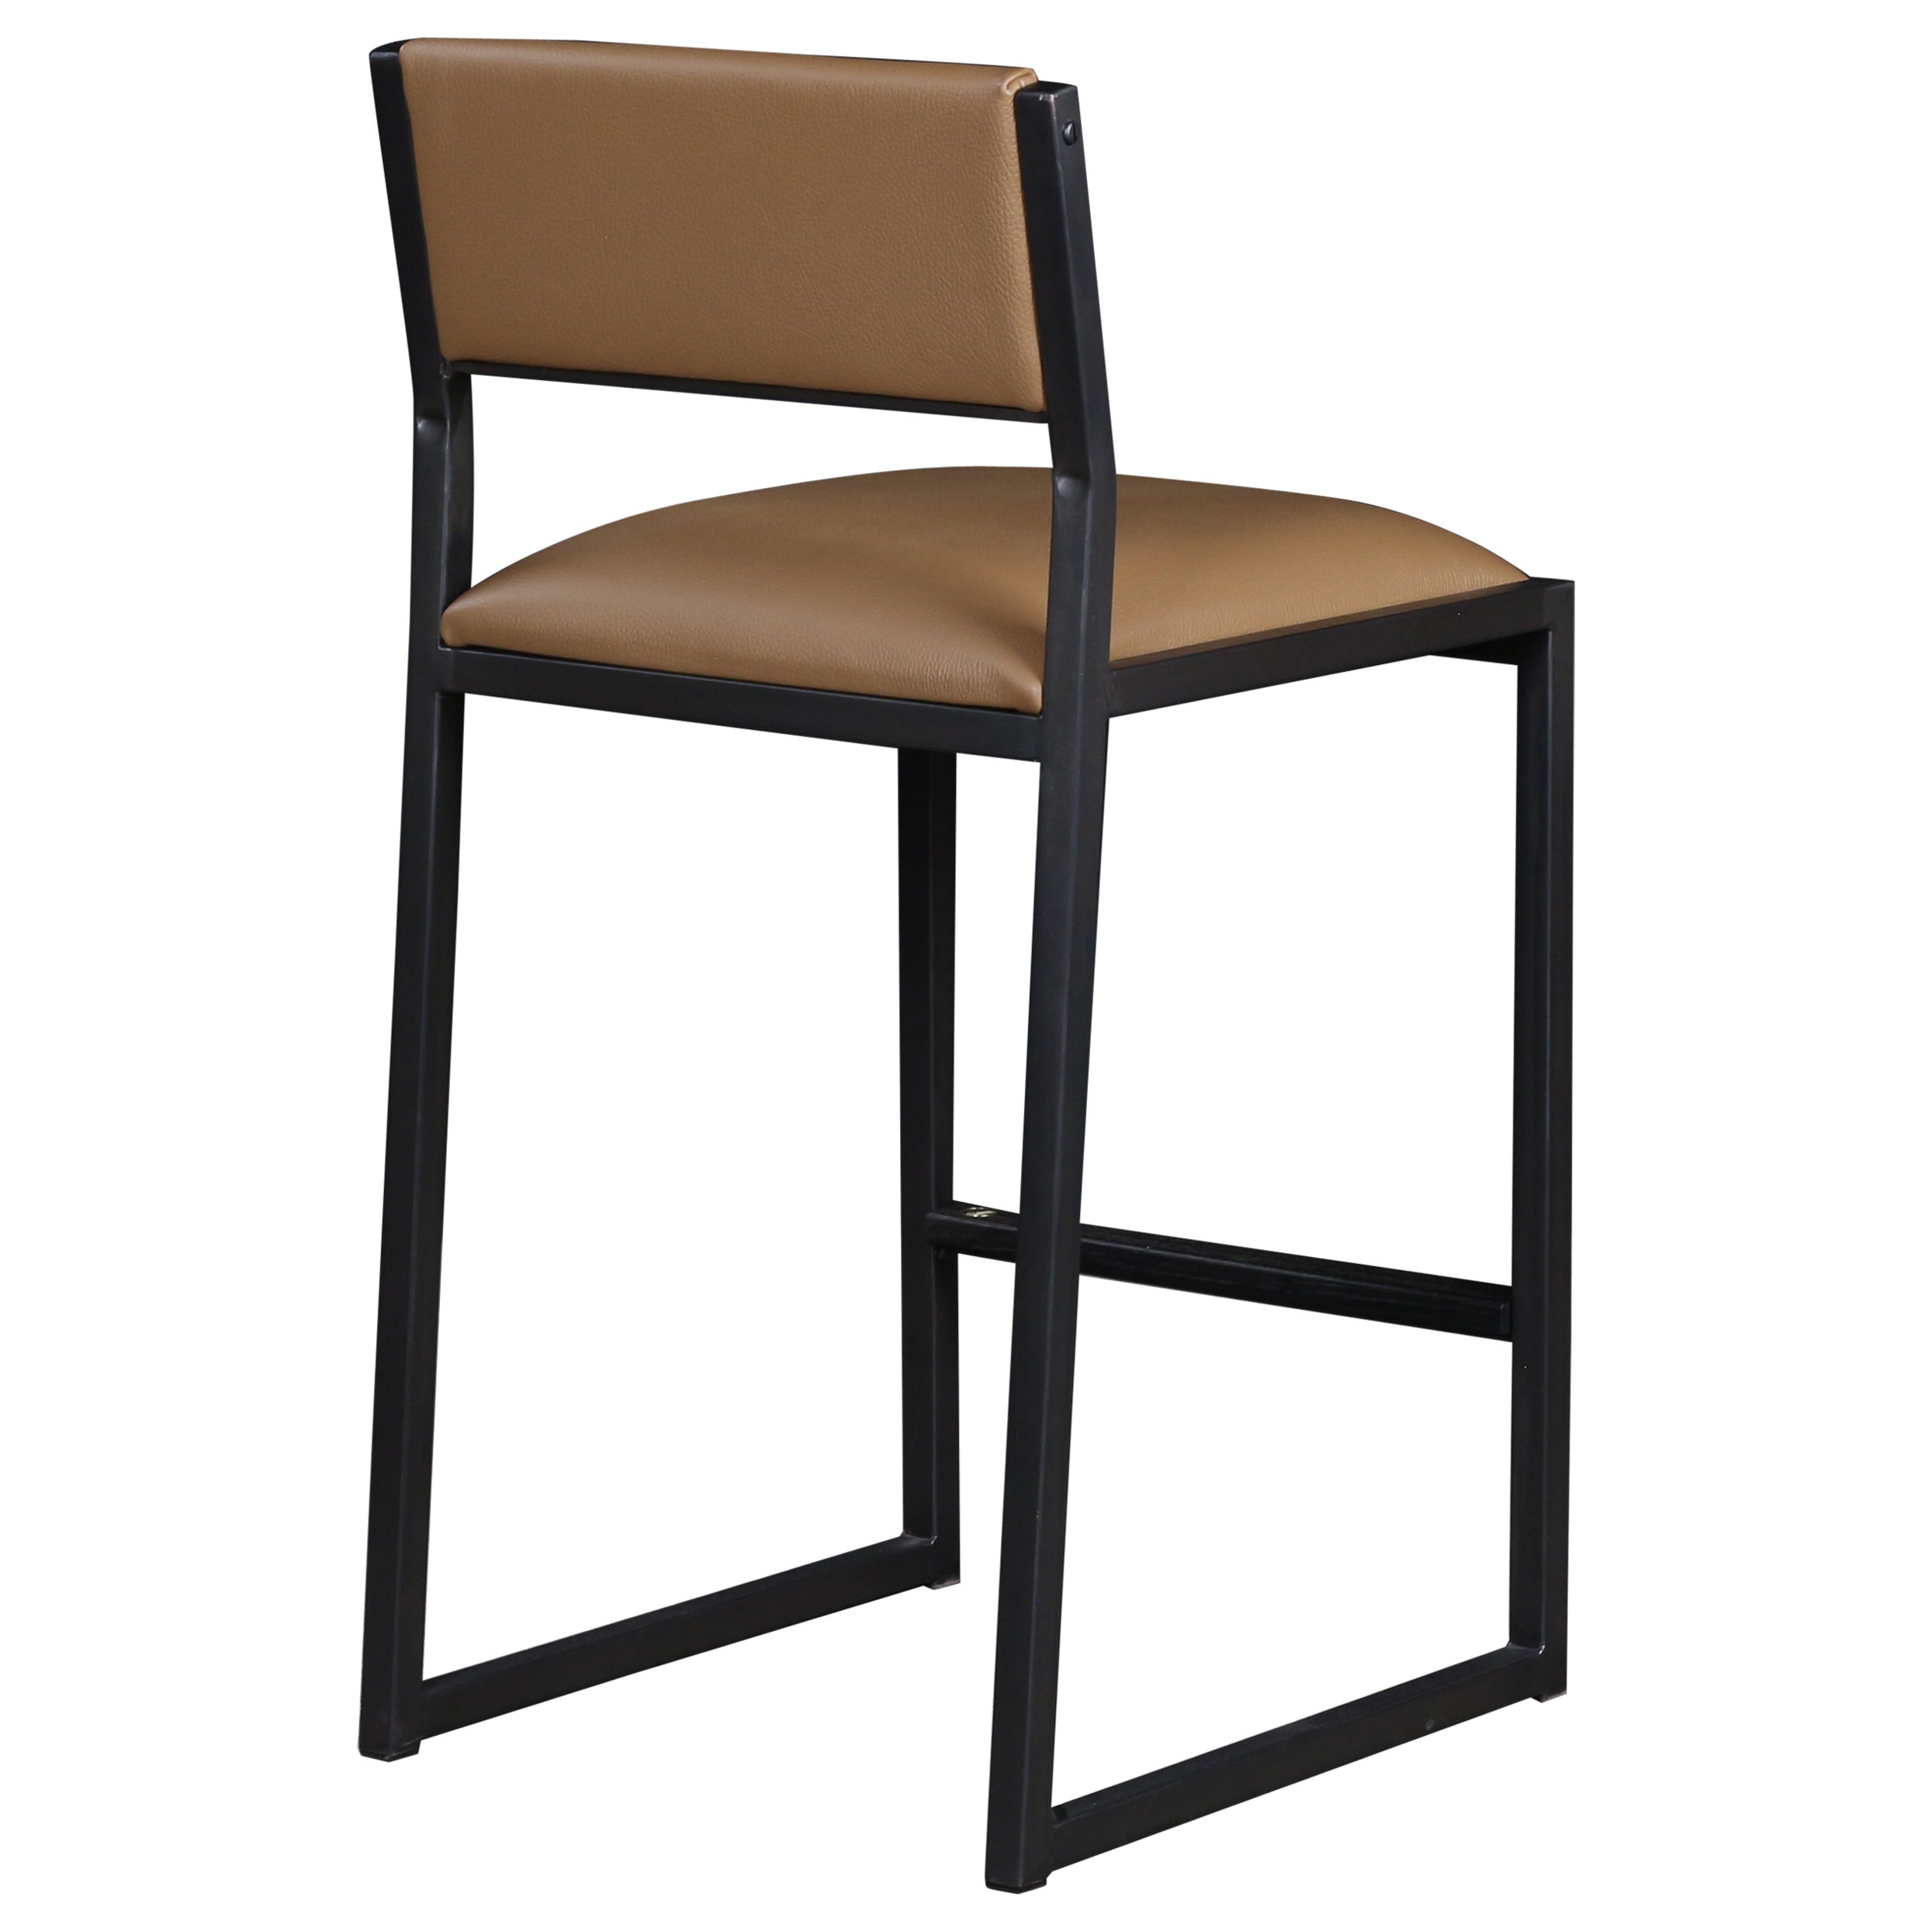 The shaker modern counter stool chair is handmade to order. Featuring our optional Luxurious Dull Champagne metal frame and a Genuine leather seat and back. Also offered in COM or COL. Inspired by the boarding ladder steps of an old boat. The